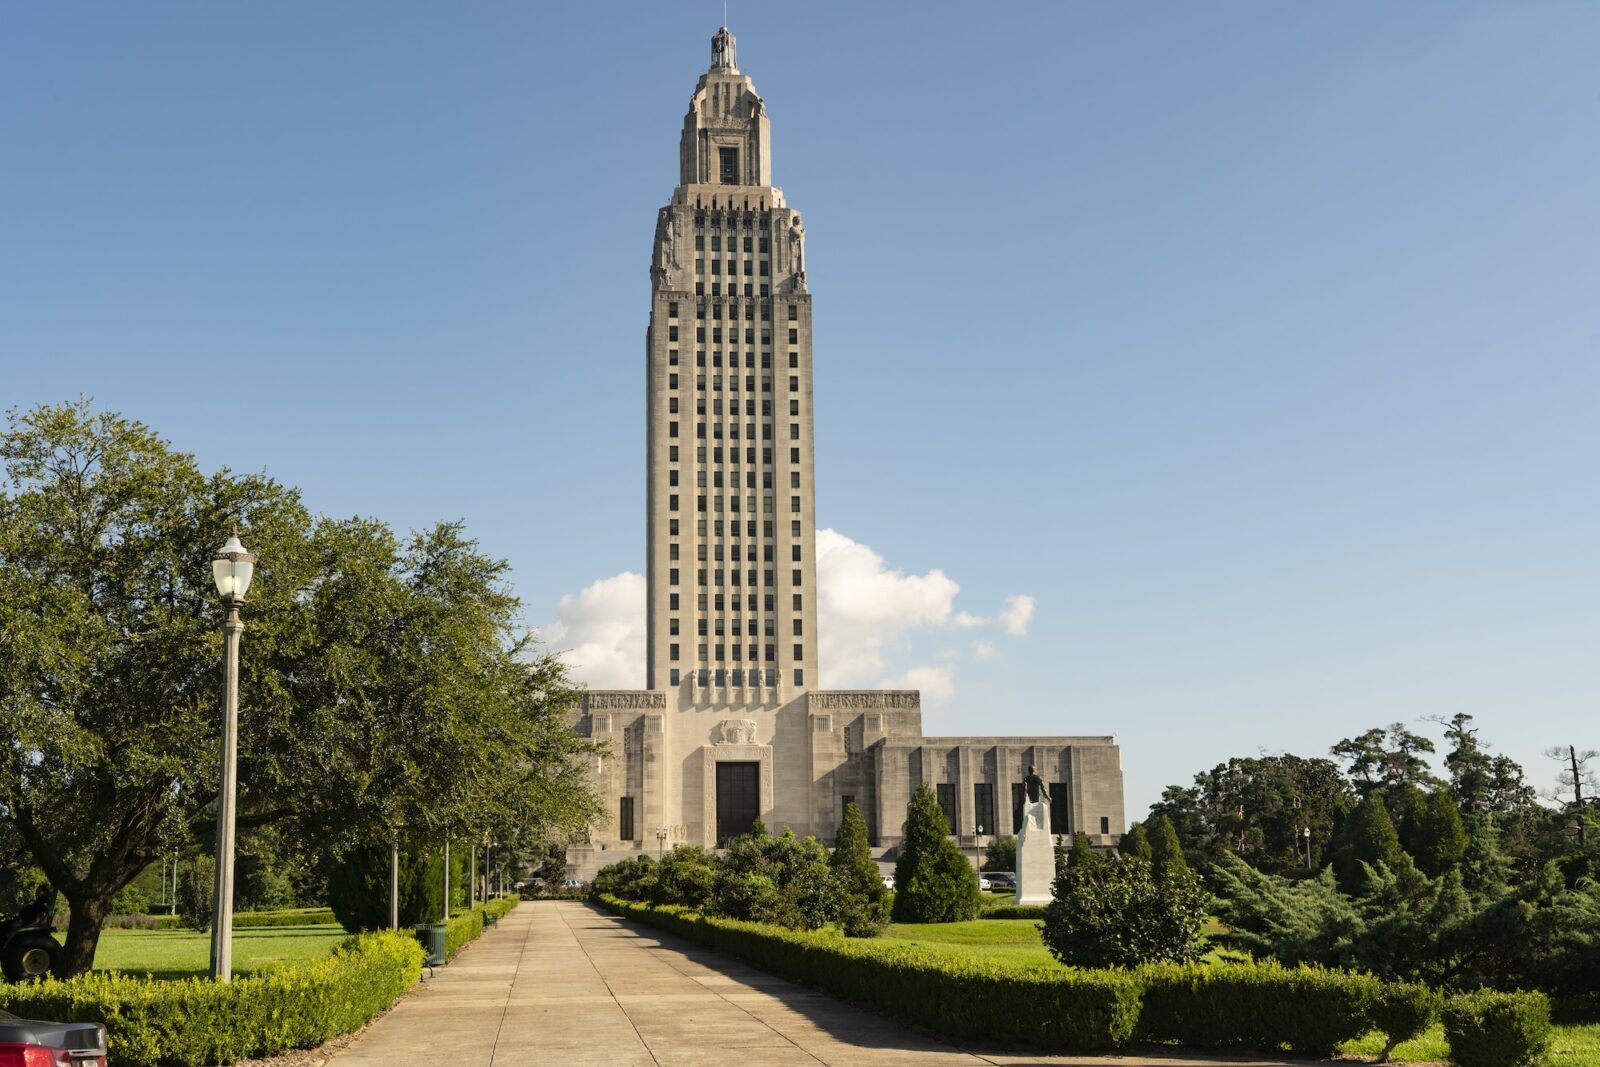 Blue Skies at the State Capital Building Baton Rouge Louisiana